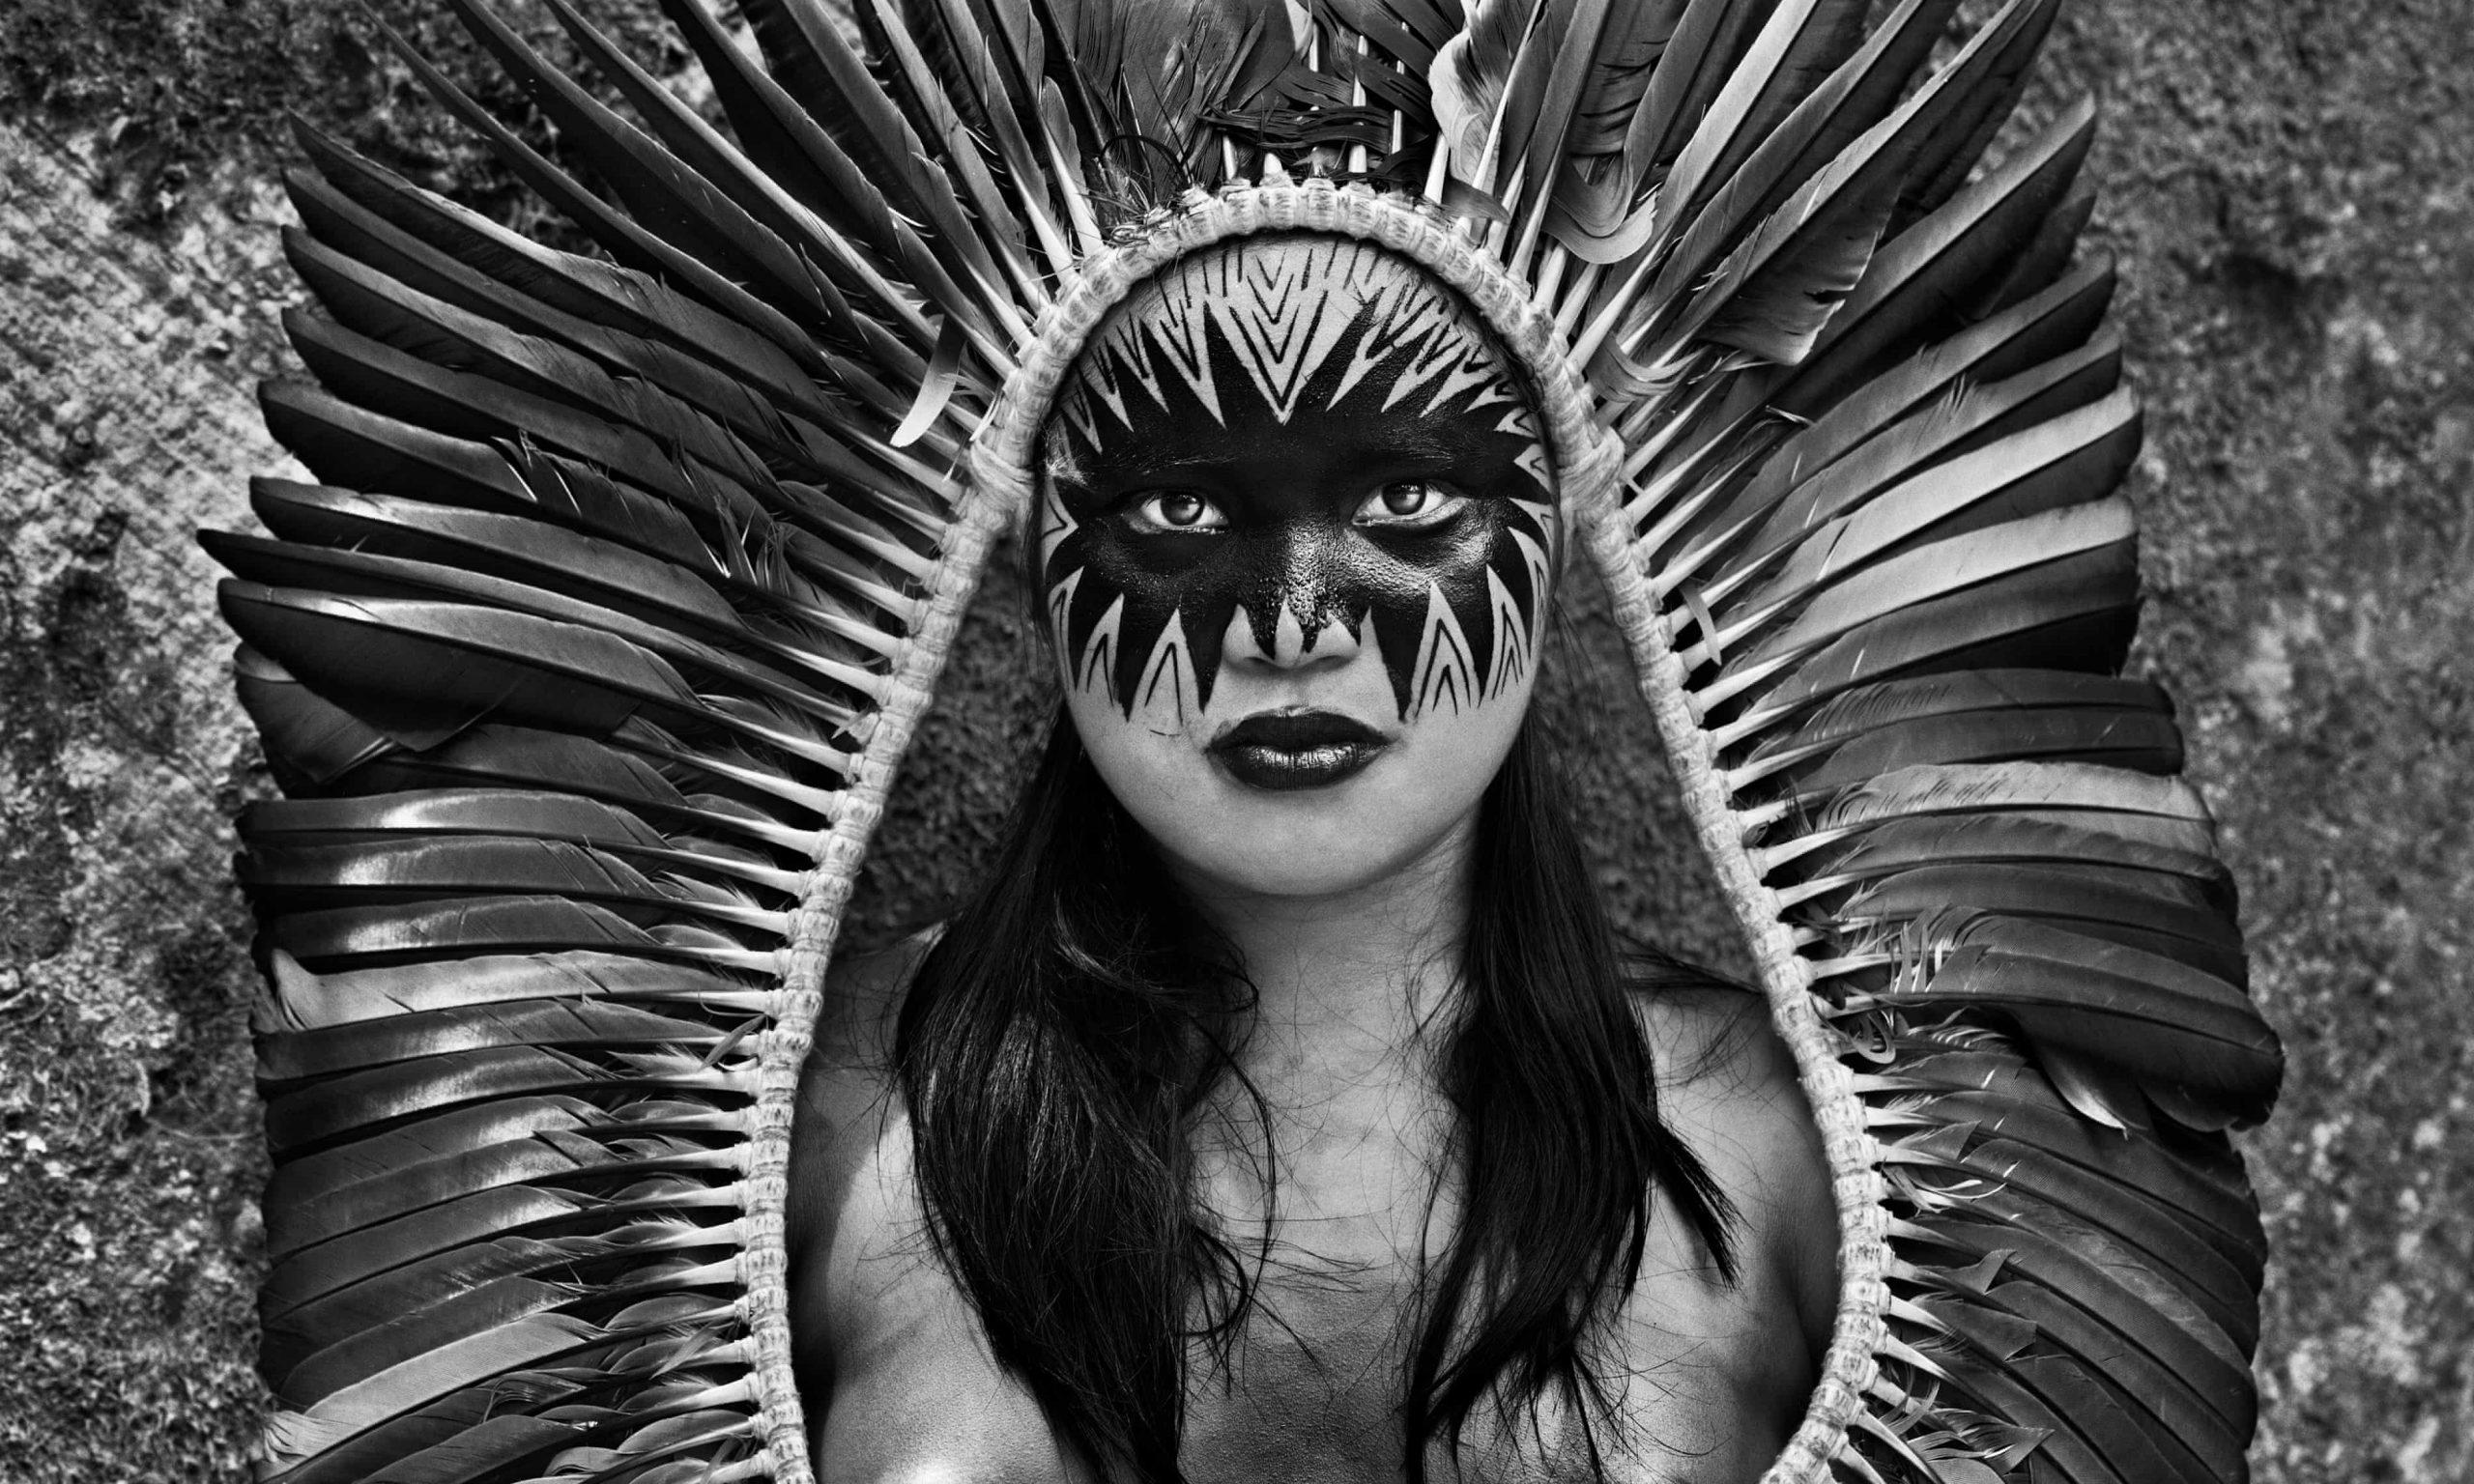 Bela Yawanawá, from the village of Mutum, with a headdress and painted face. Rio Gregório indigenous territory, Acre, Brazil, 2016. Photograph: © Sebastiao Salgado/nbpictures.com